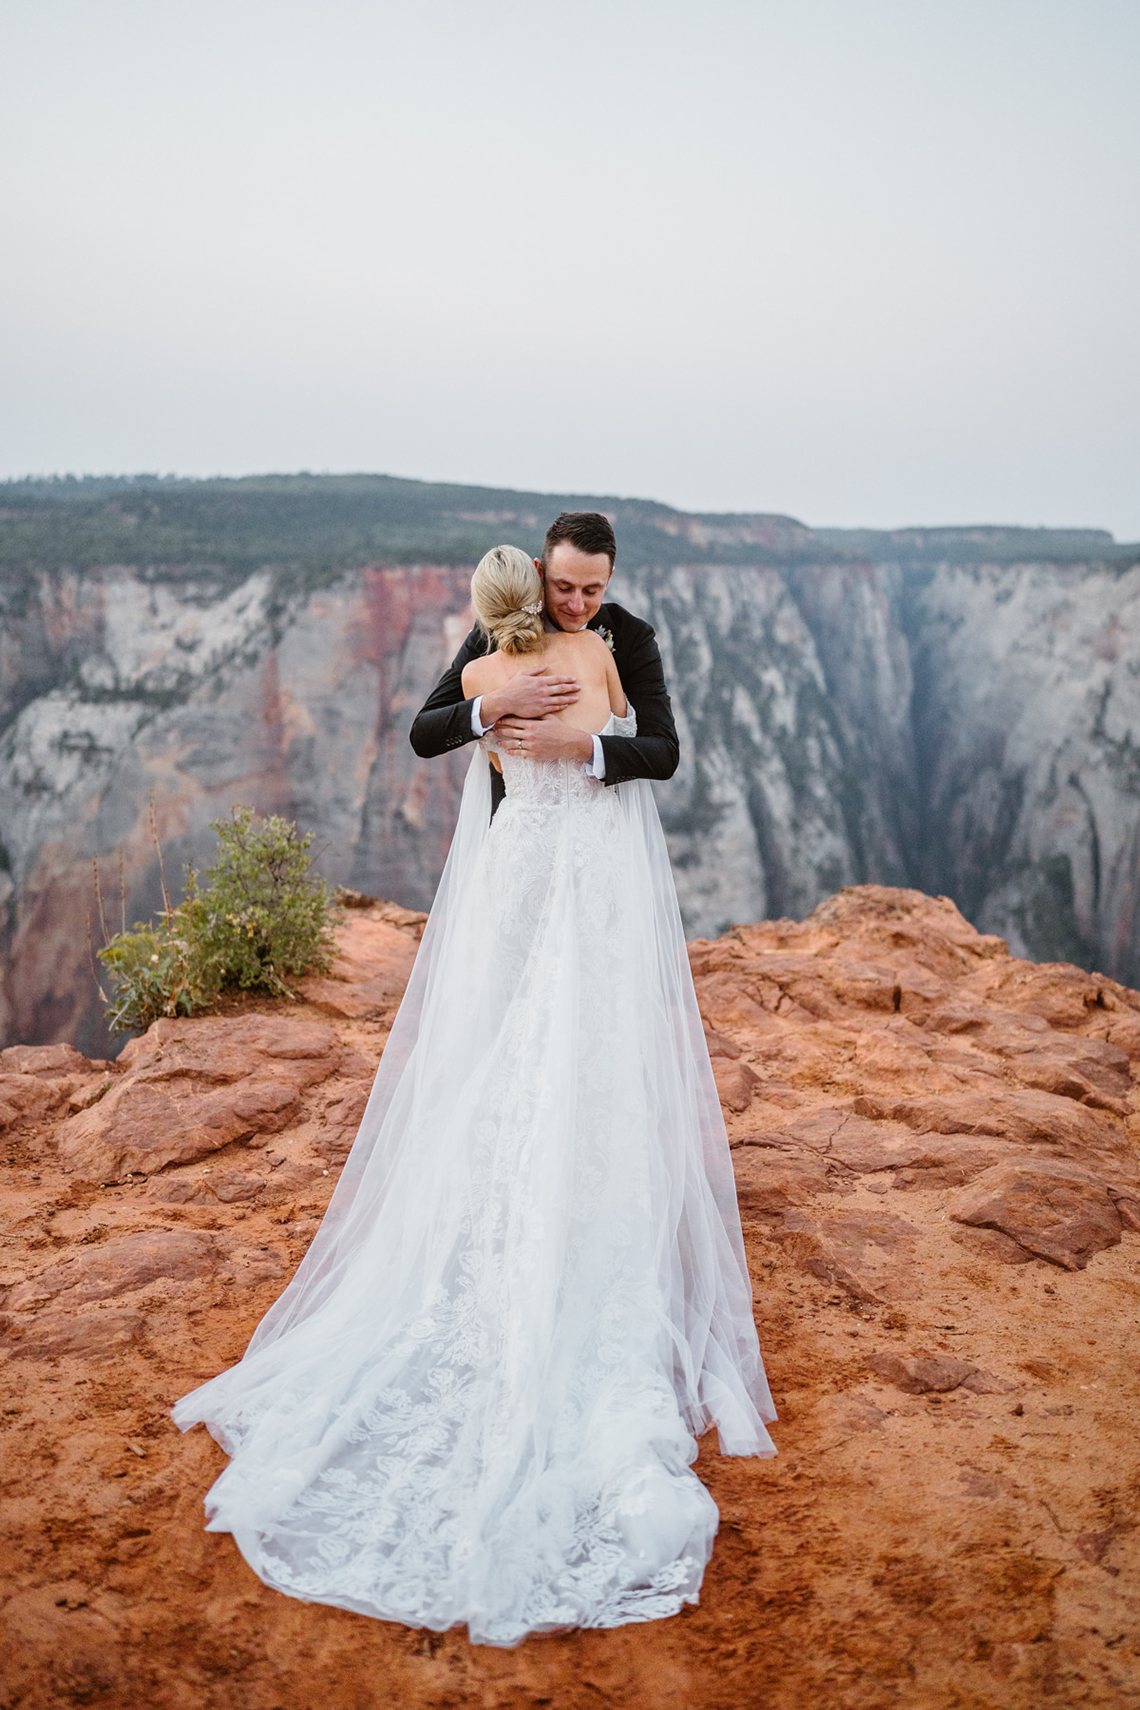 Utah Zion National Park Adventure Love Escape - Vows and Spikes Photography - 30 Wedding Reflections